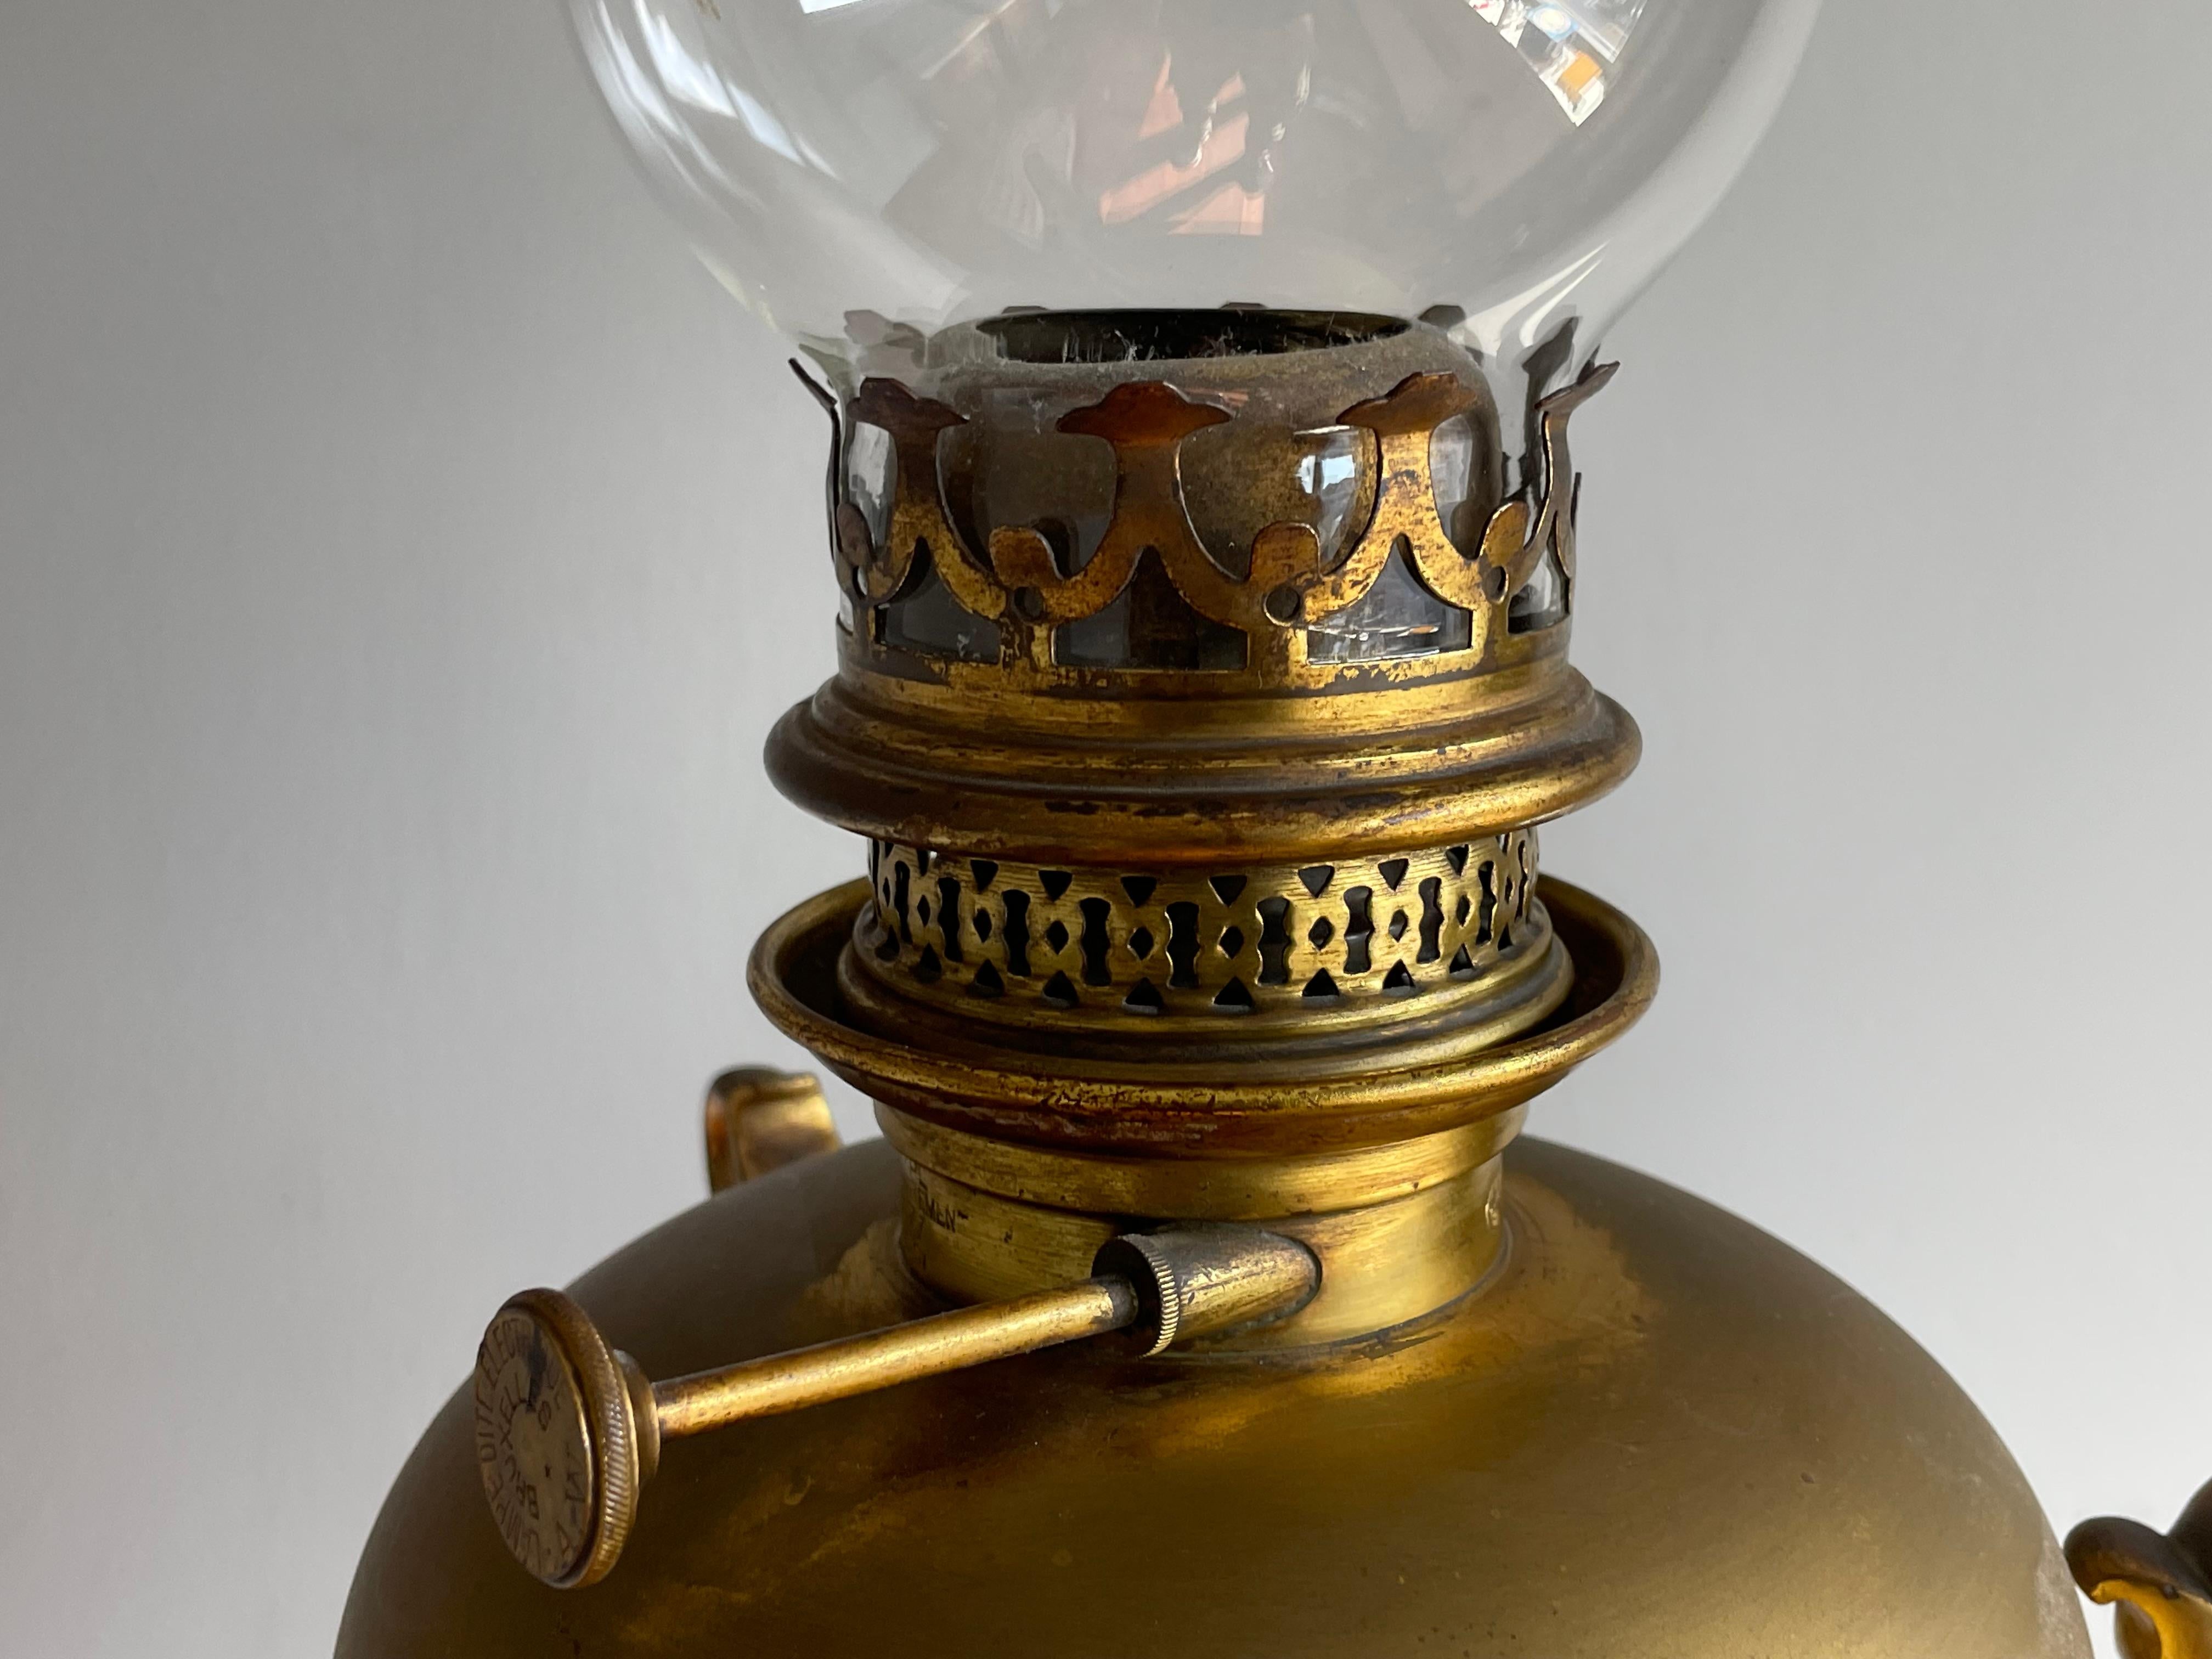 Stunning 19th Century Empire Revival Bronze & Glass Oil Floor Lamp By H. Luppens For Sale 4